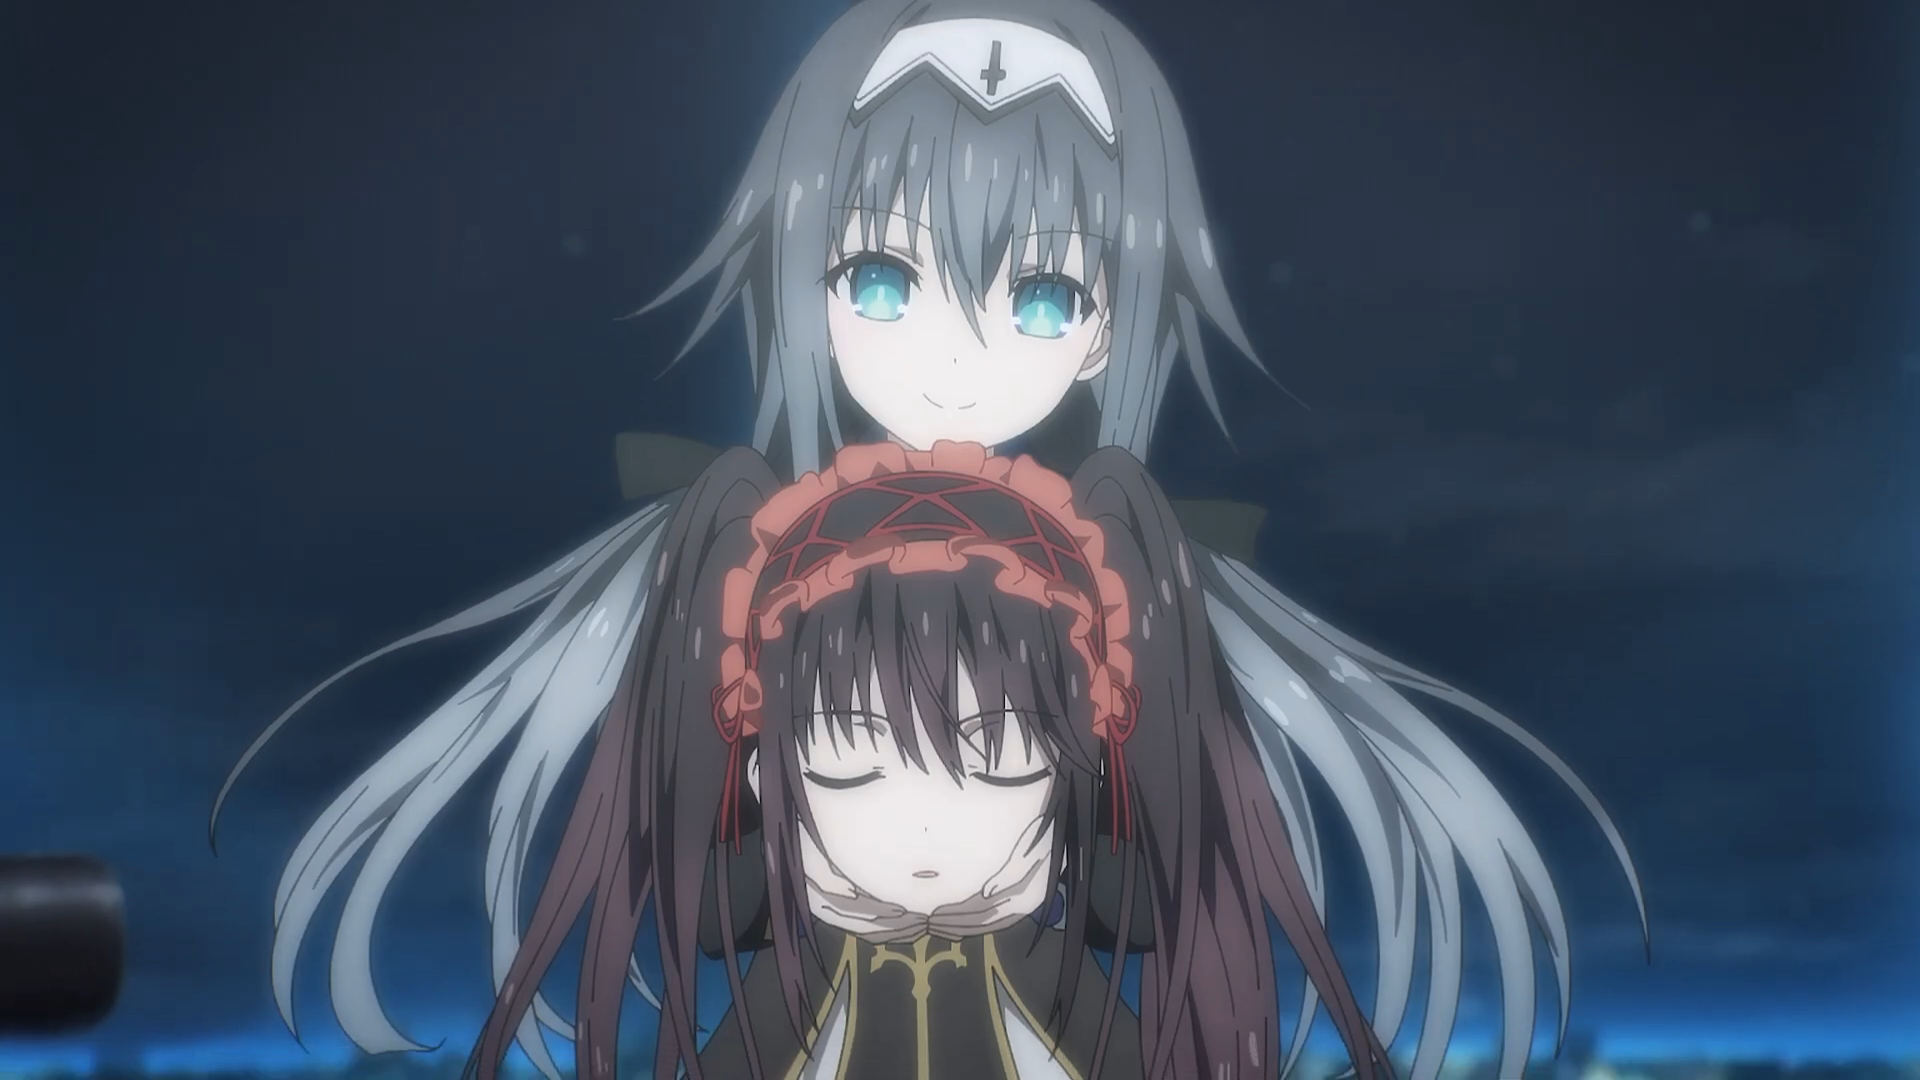 Date A Live V Episode 4: Release Date, Expected Plot, where to watch?